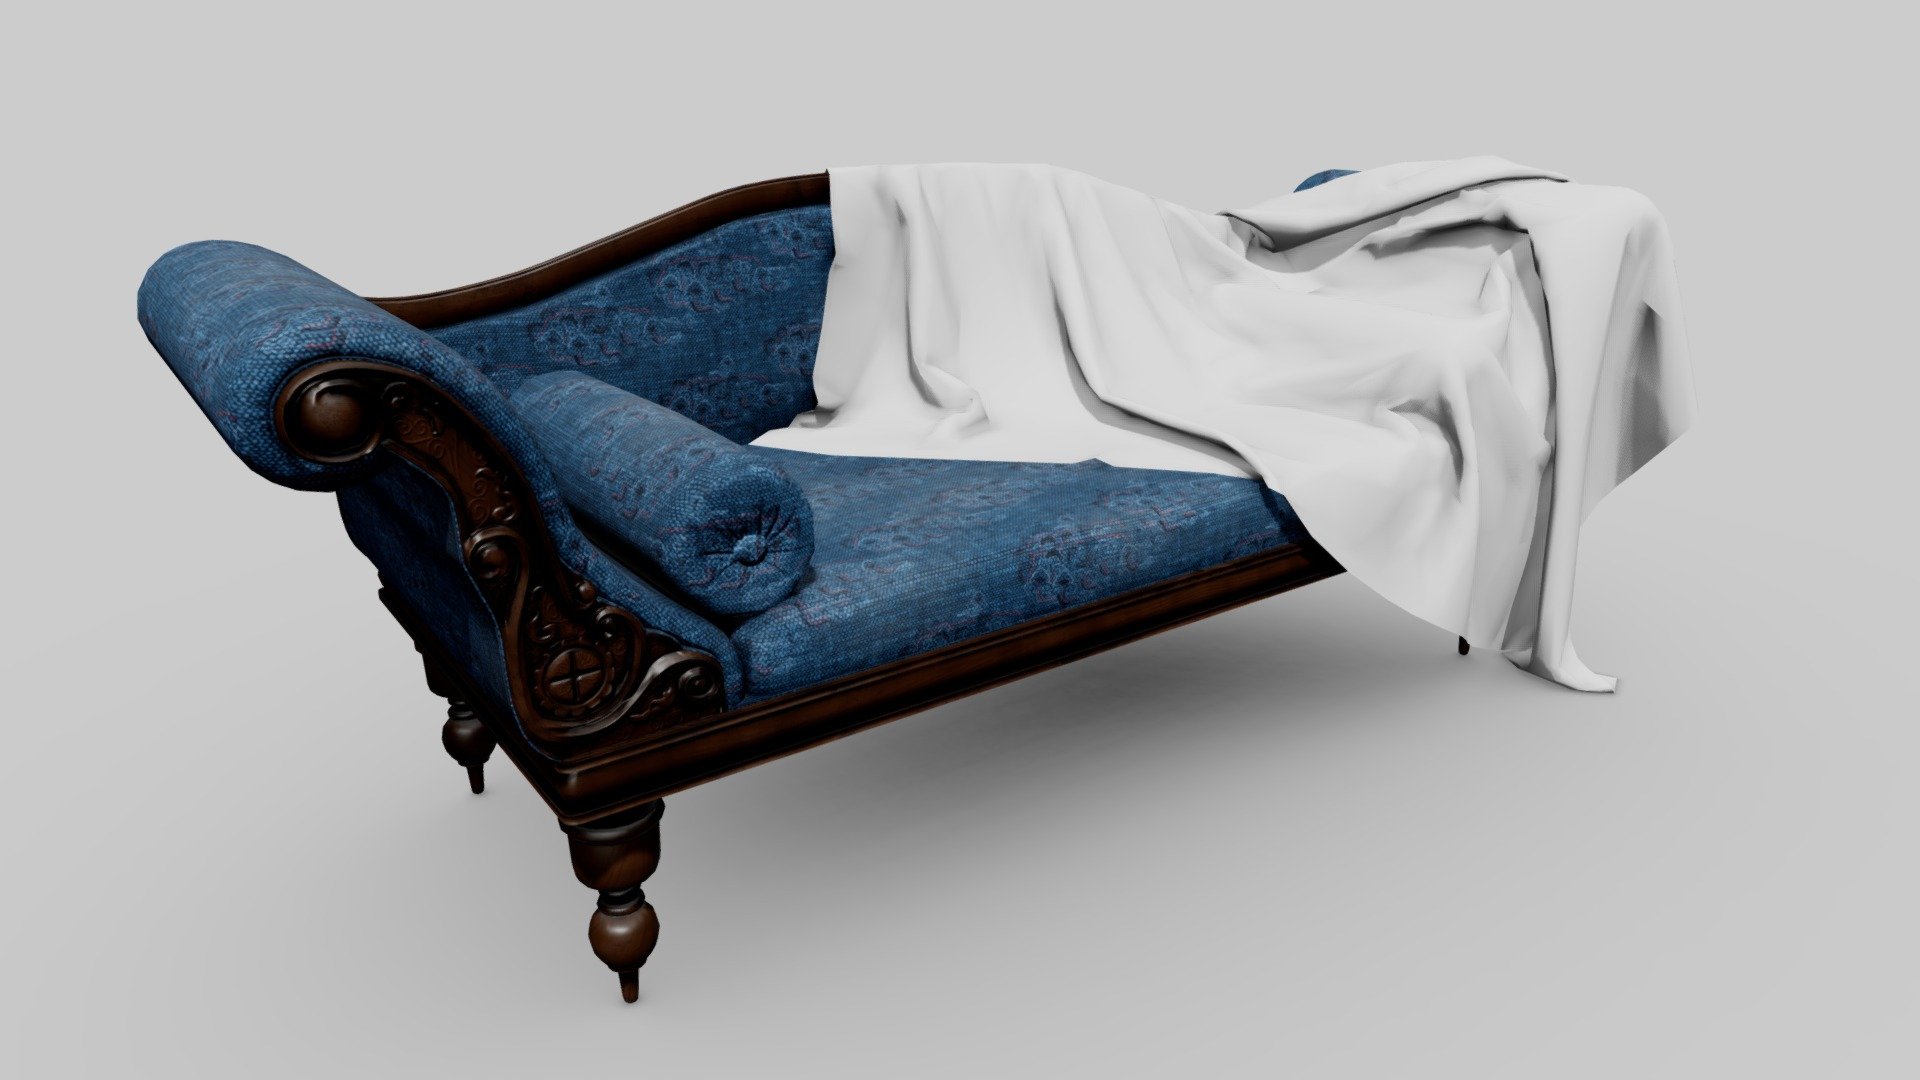 A sofa I made for an unfinished environment. The blanket has yet to be textured but is an easy fix with a tiling mtl in unreal or unity 3d model